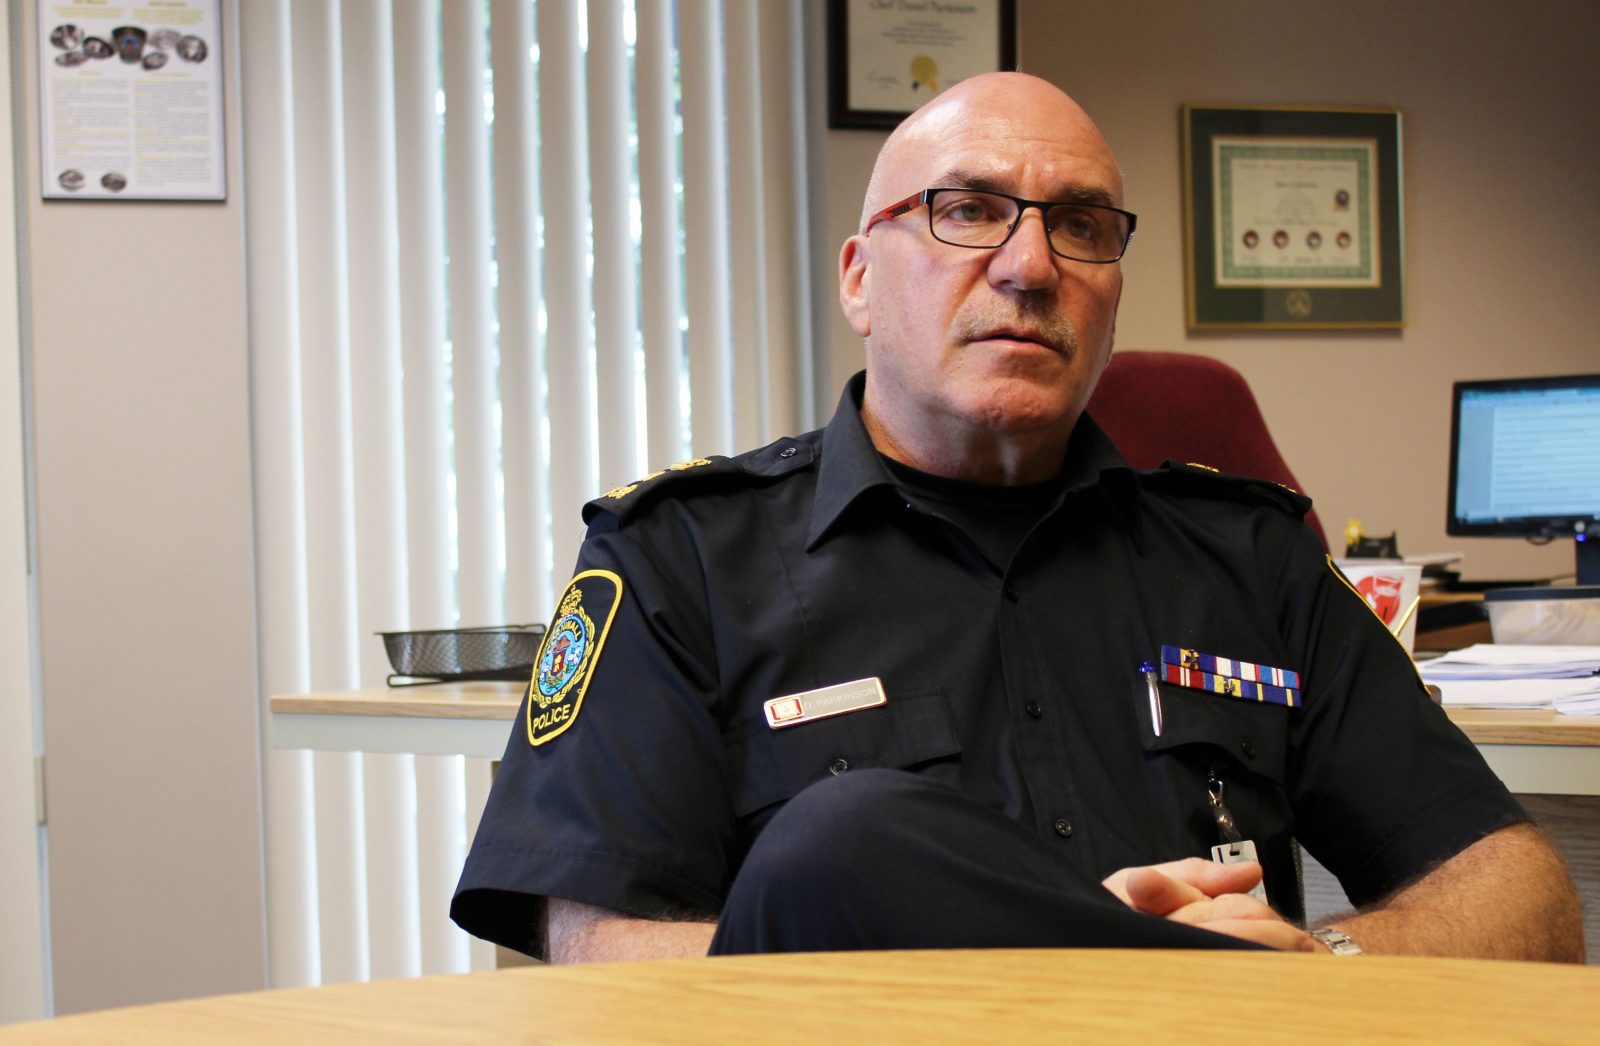 Sex-offender data goes public, police chief welcomes heightened awareness